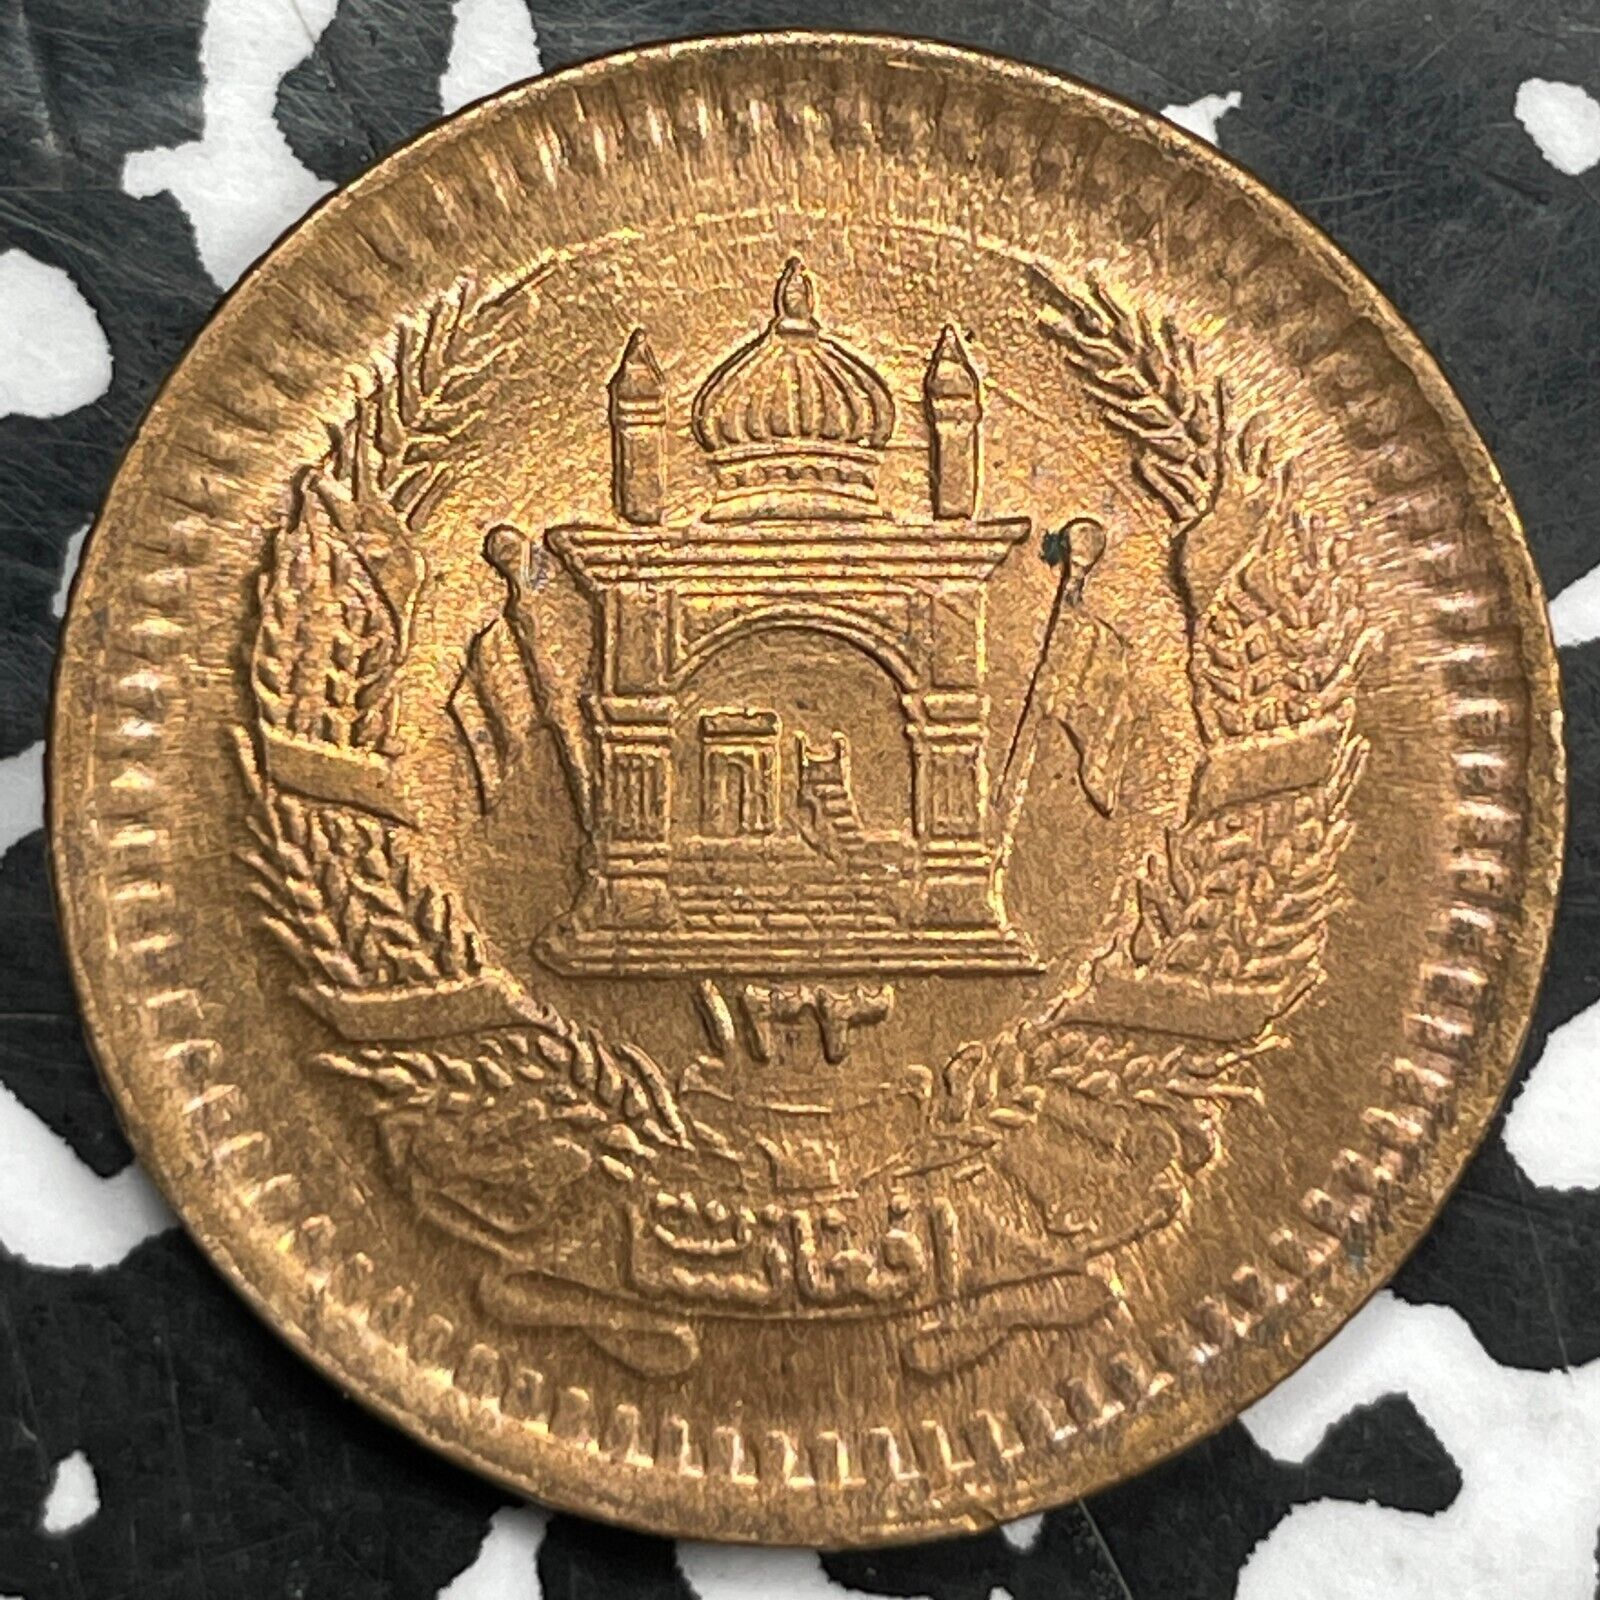 Sh 1330 (1951) Afghanistan 50 Pul (27 Available) High Grade! (1 Coin Only)